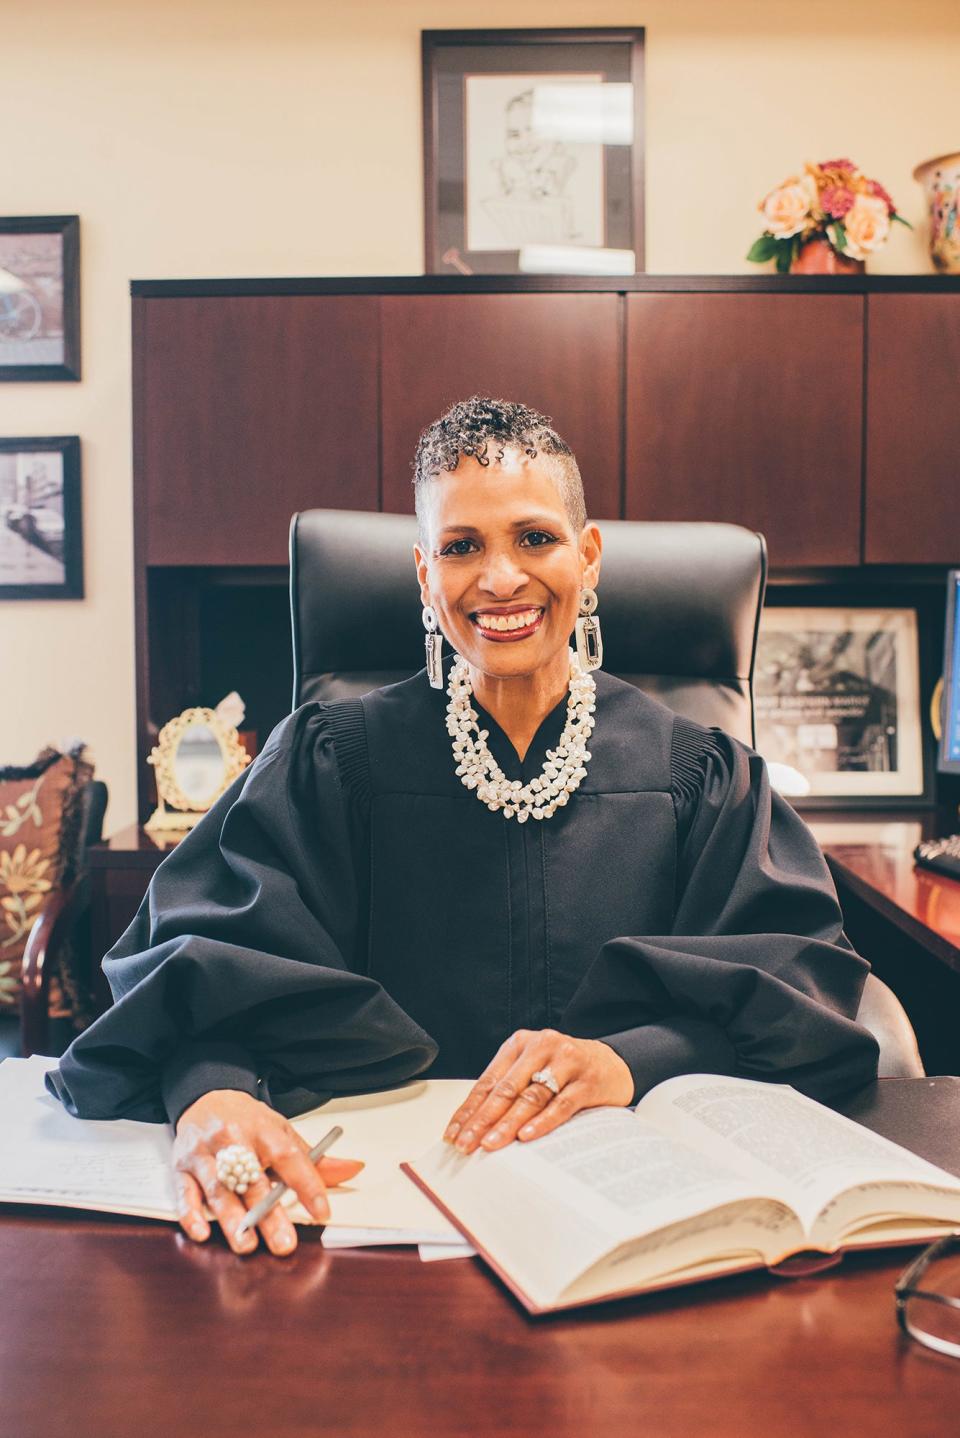 “The most humbling thing I have ever done” is how lifelong Detroiter Donna Robinson Milhouse describes the work she performs as a 36th District Court judge in her hometown. Milhouse serves a court with jurisdiction over general civil, landlord tenant, small claims, traffic and criminal matters within the city of Detroit.